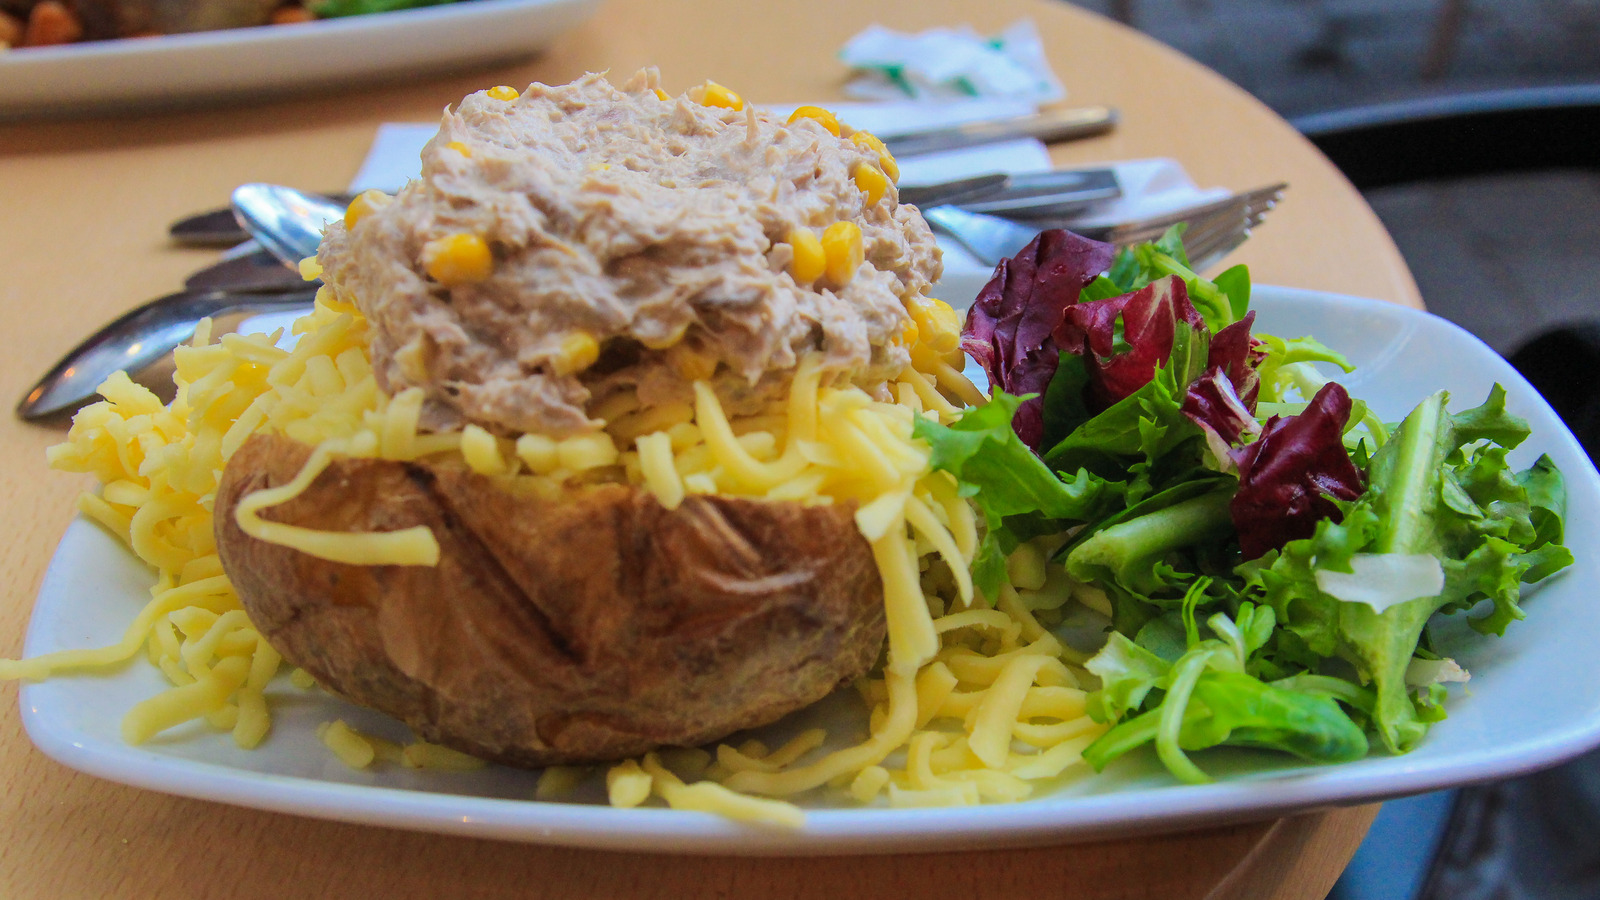 Jacket Potatoes - Great Use For Canned Tuna Or British Abomination?